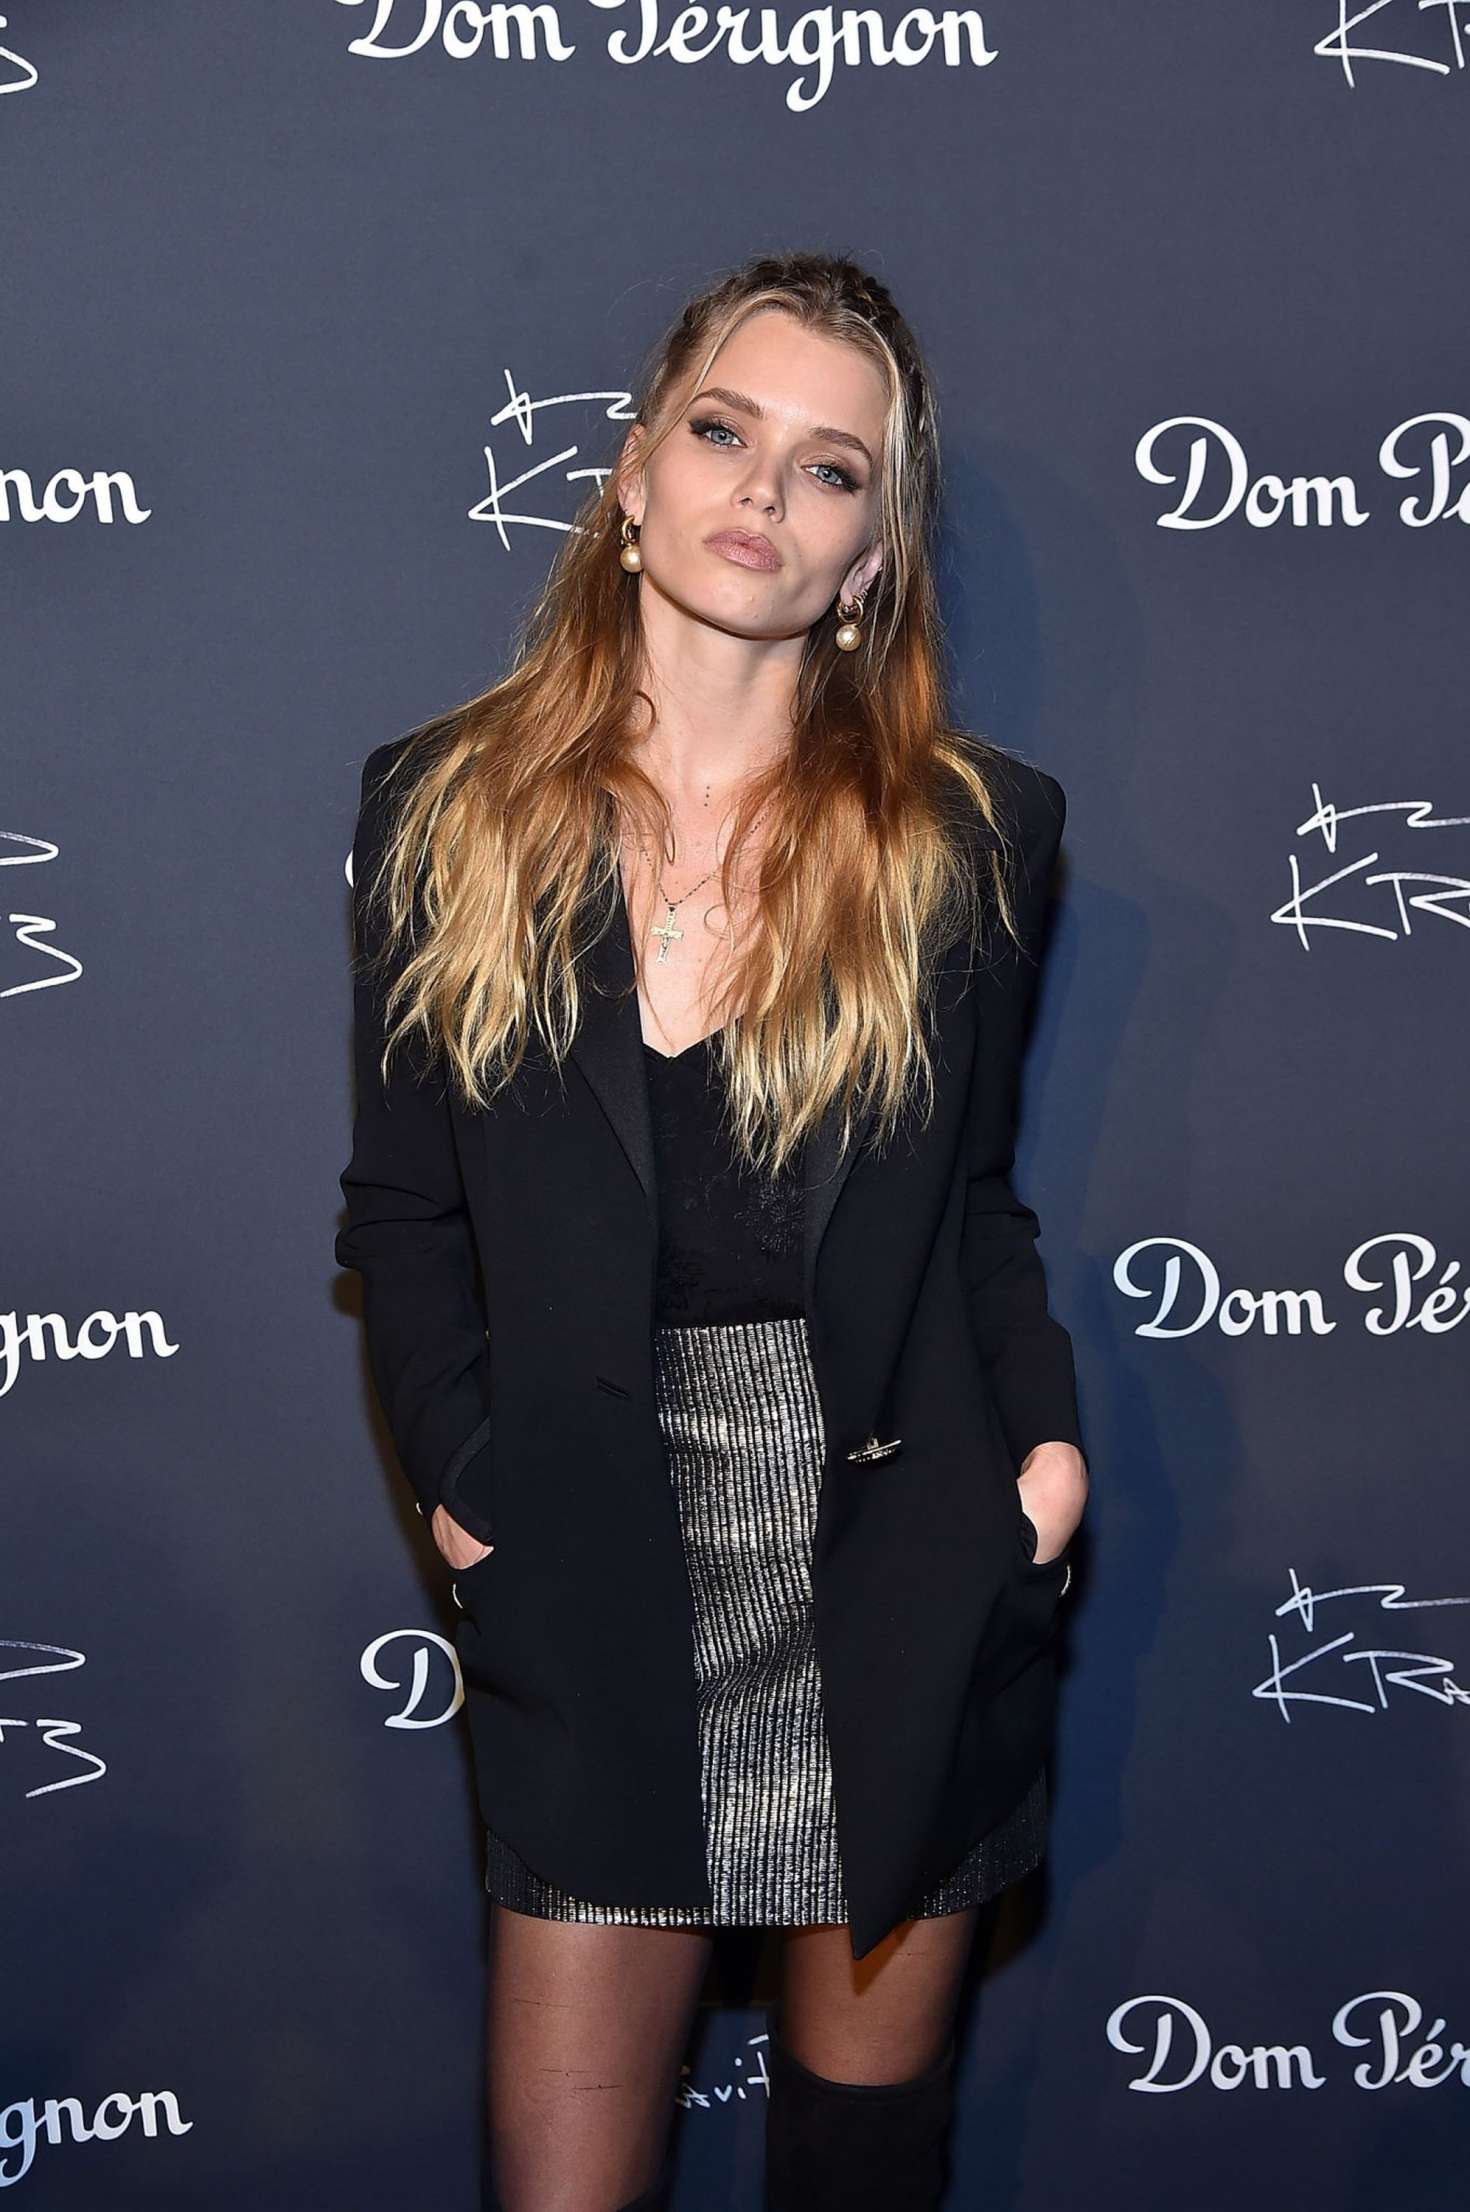 Abbey Lee Kershaw - Dom Perignon and Lenny Kravitz: 'Assemblage' Exhibition in NY